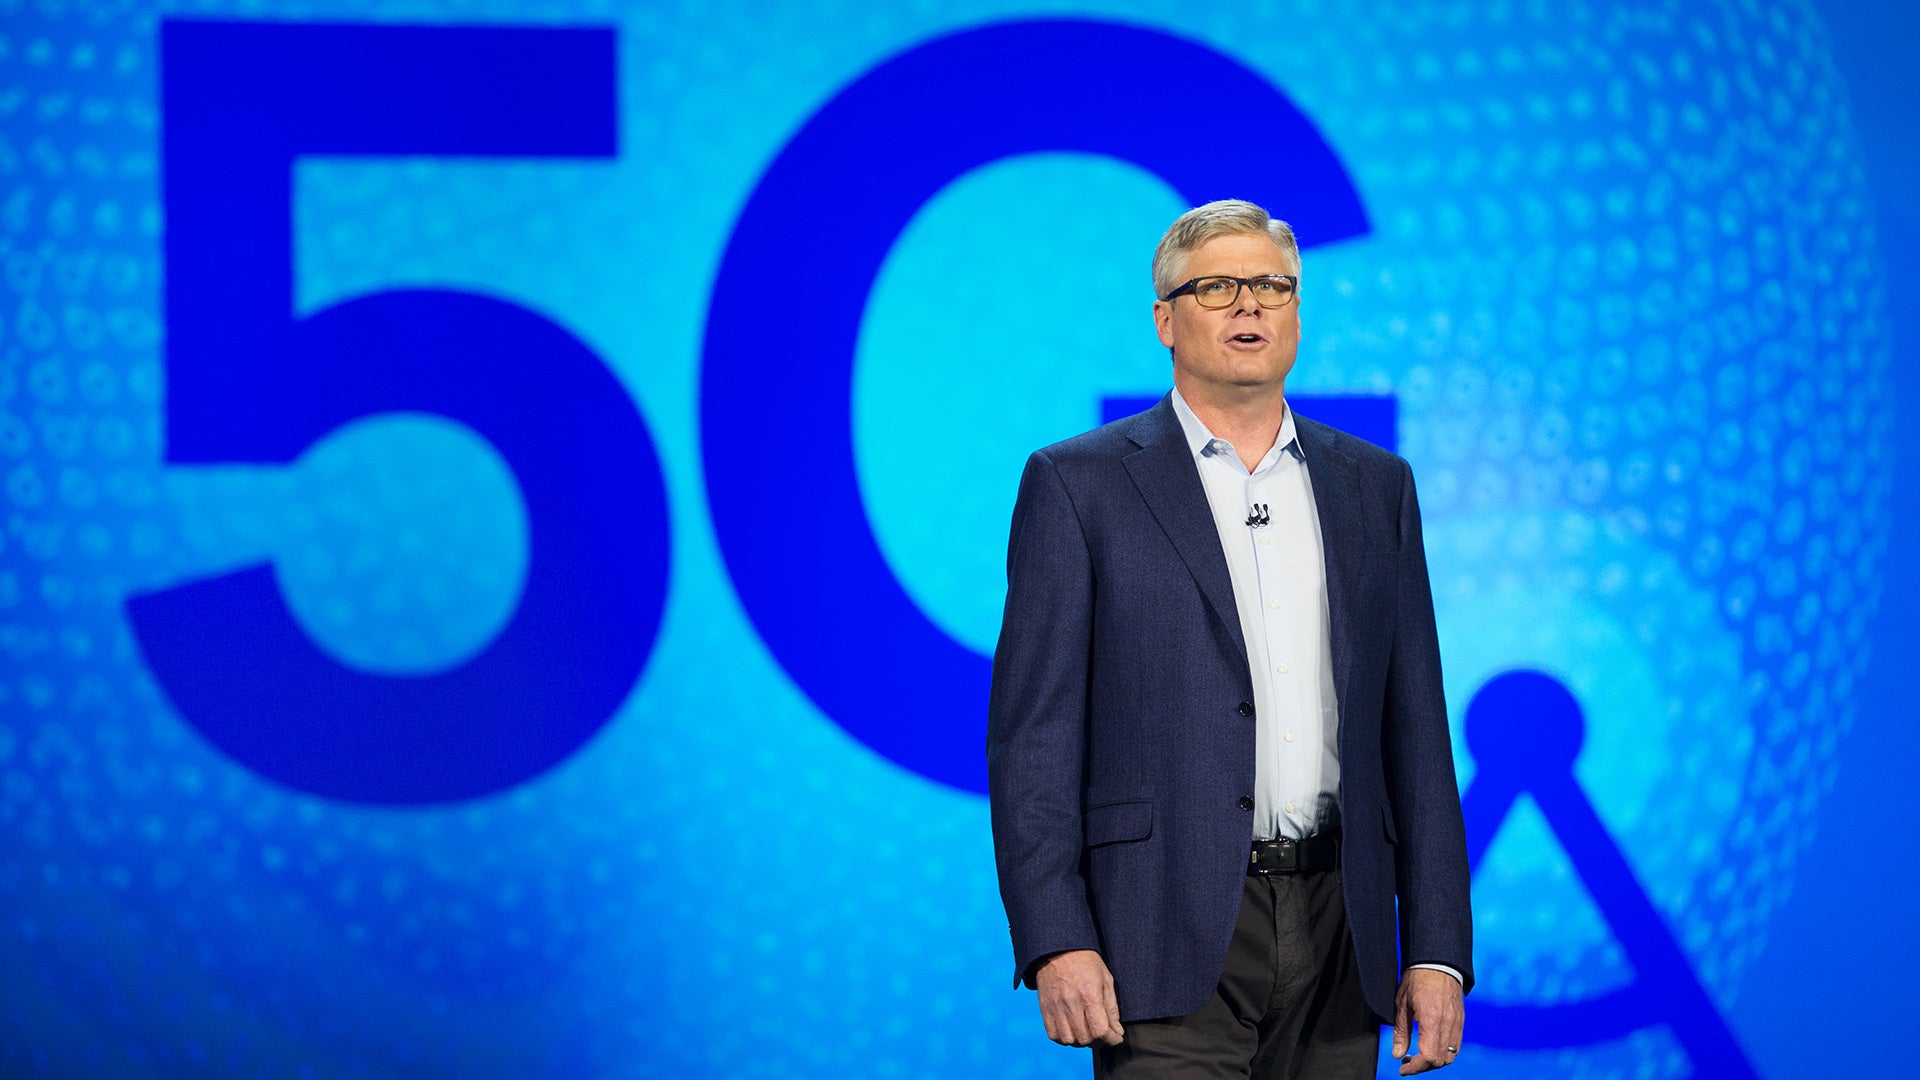 Qualcomm CEO Steve Mollenkopf got a bonus after Apple and Qualcomm reached a settlement ending their acrimonious legal battles - Qualcomm might be able to continue its anticompetitive chip selling policies